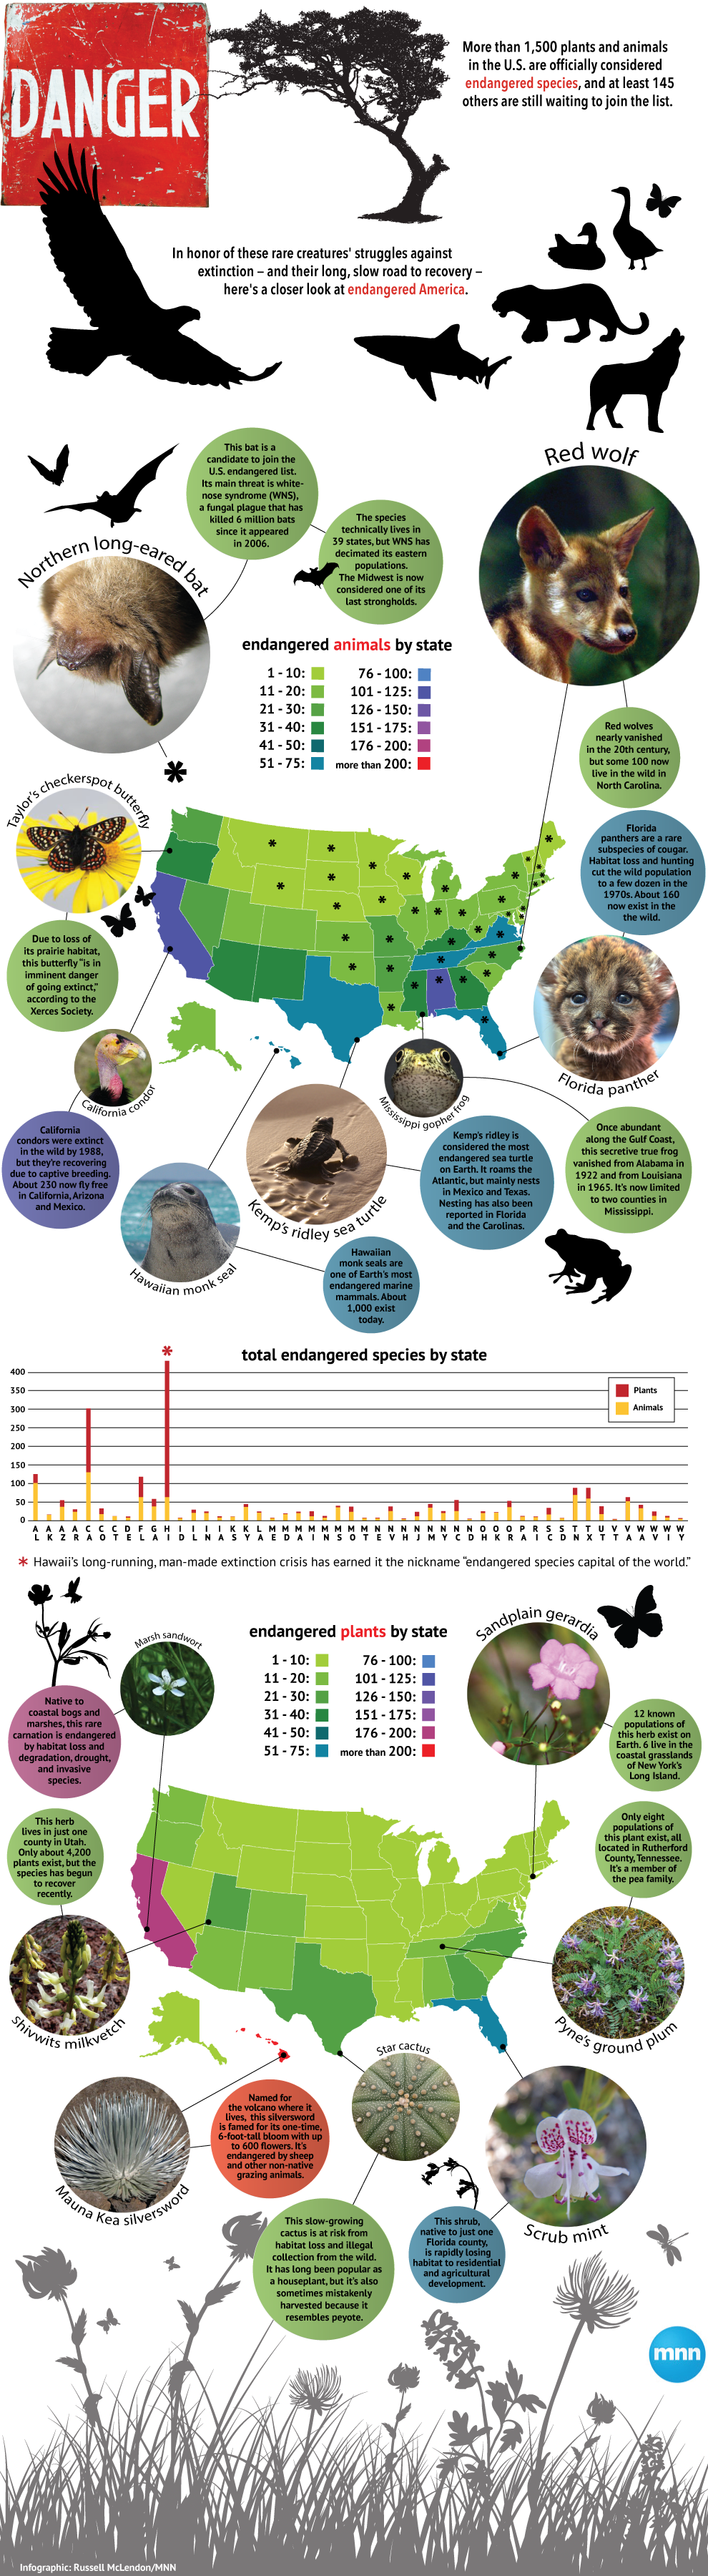 Which U.S. states have the most endangered species?